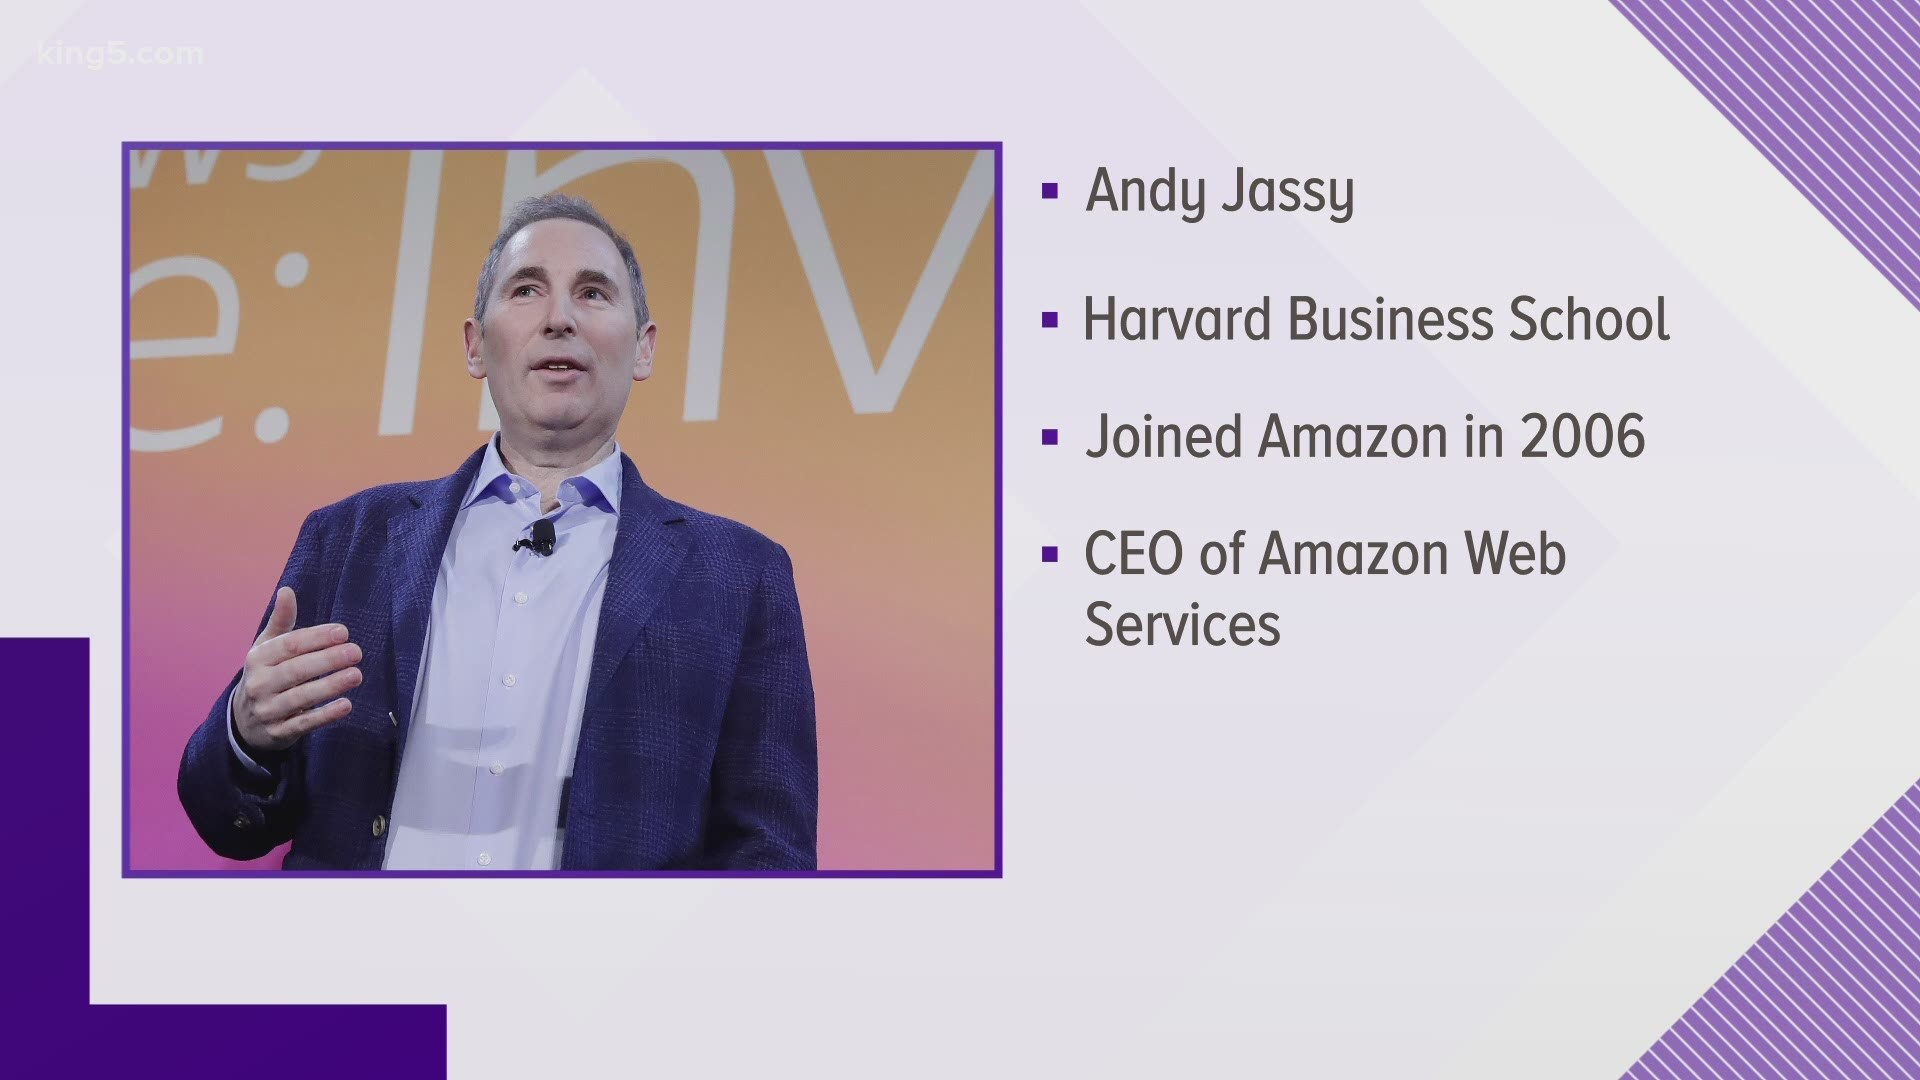 Amazon announced its founder and CEO Jeff Bezos will transition to the role of executive chair in the third quarter of 2021. Andy Jassy will become the new CEO.